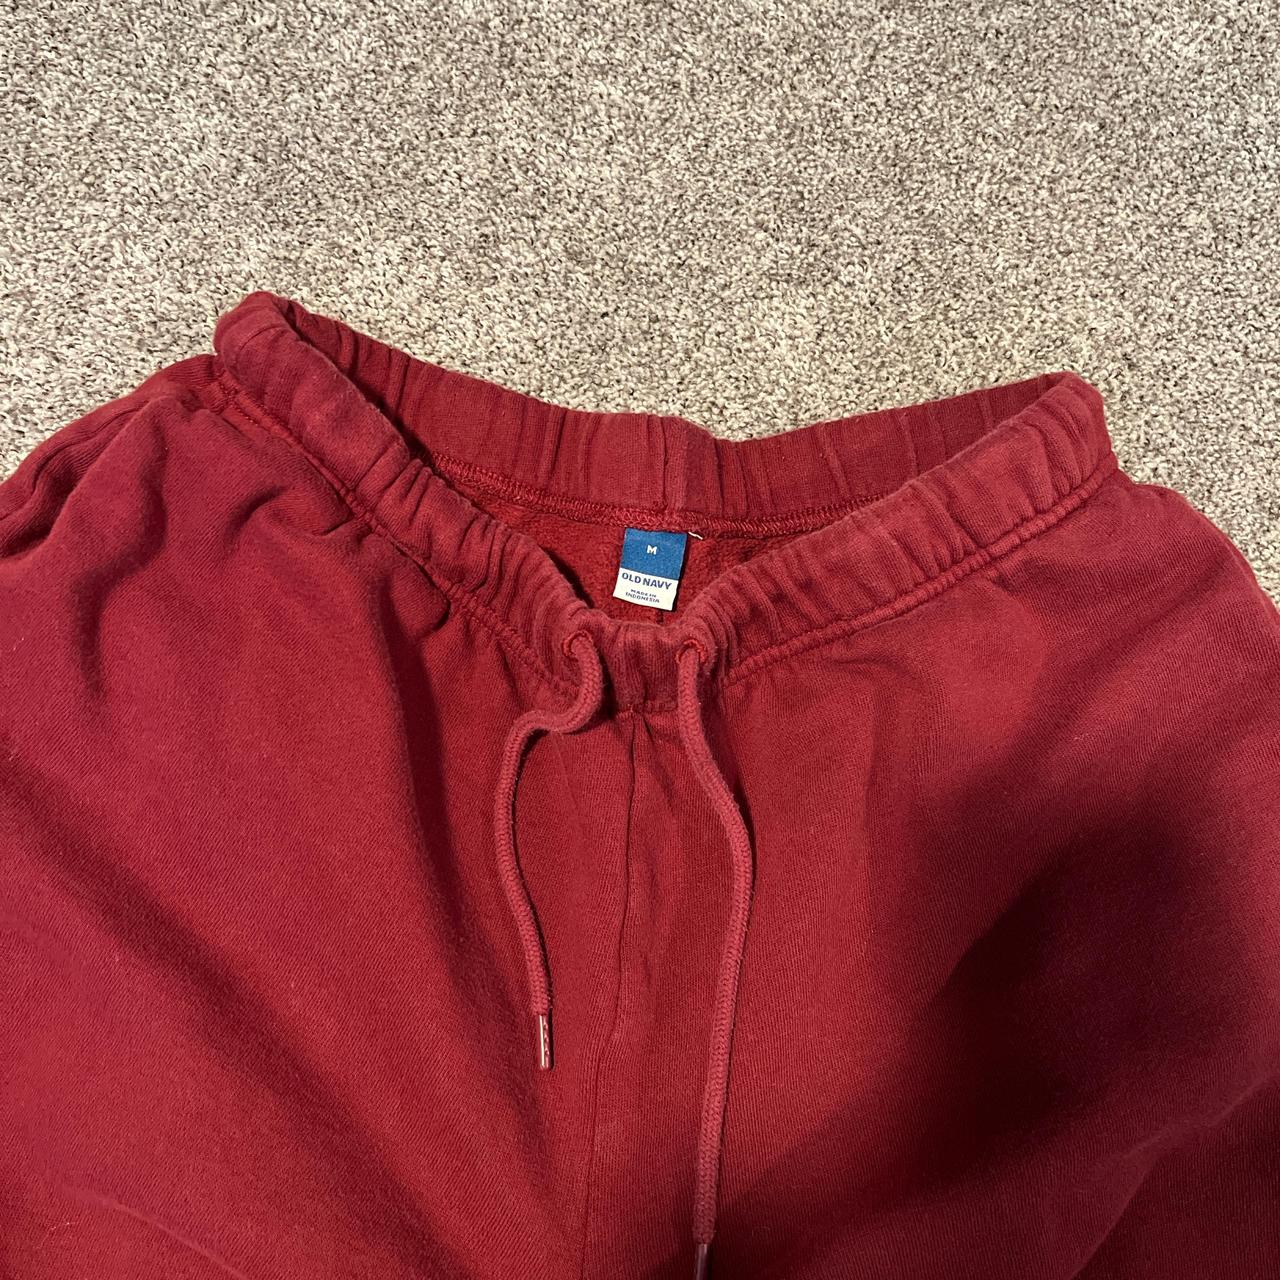 Old Navy Maroon Joggers with Logo on pant leg (SHIRT - Depop